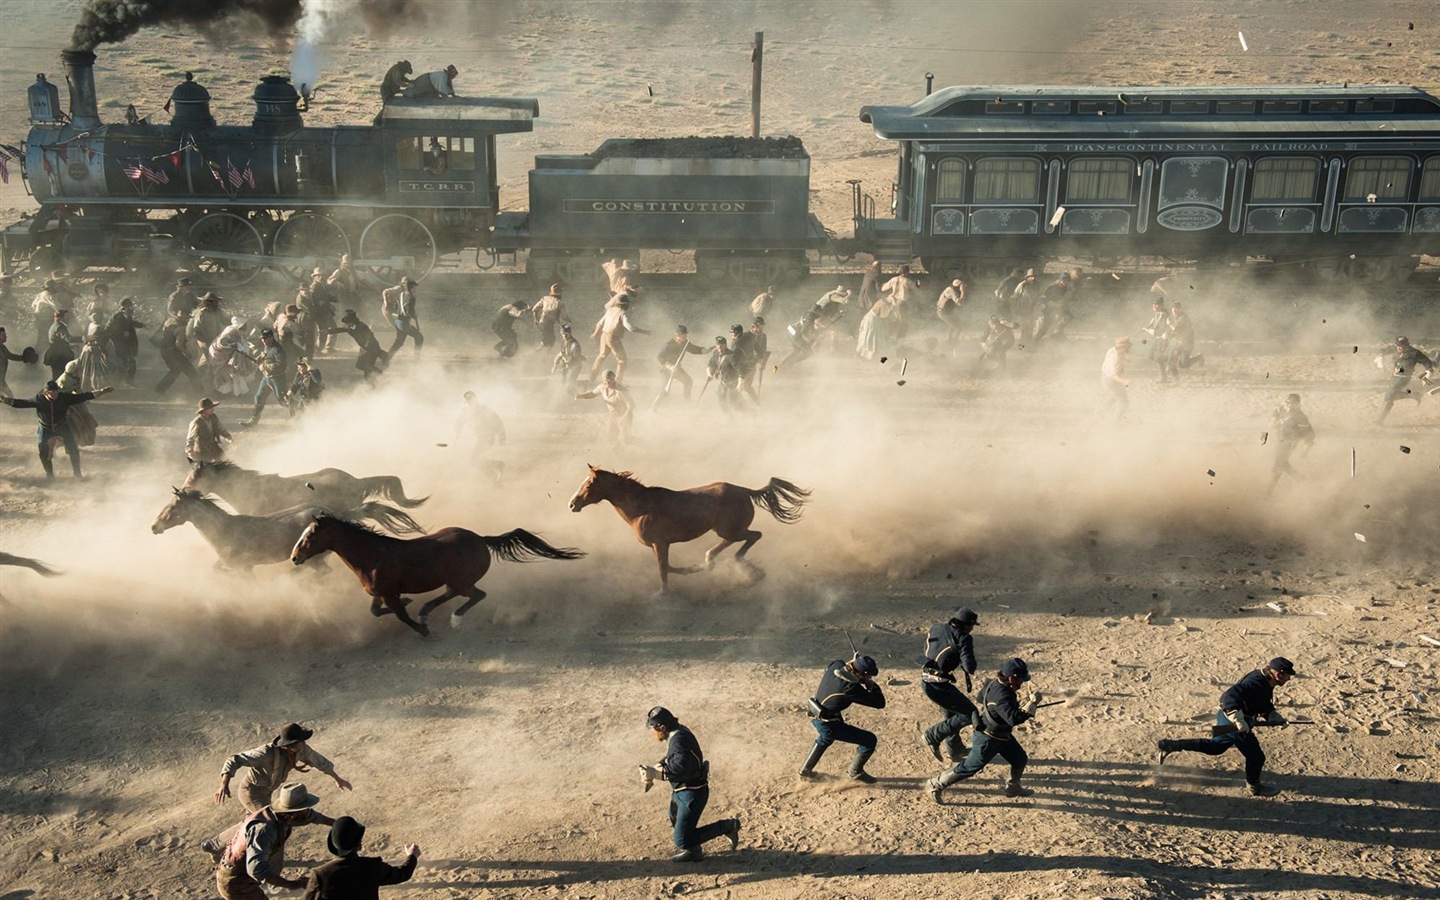 The Lone Ranger HD movie wallpapers #8 - 1440x900